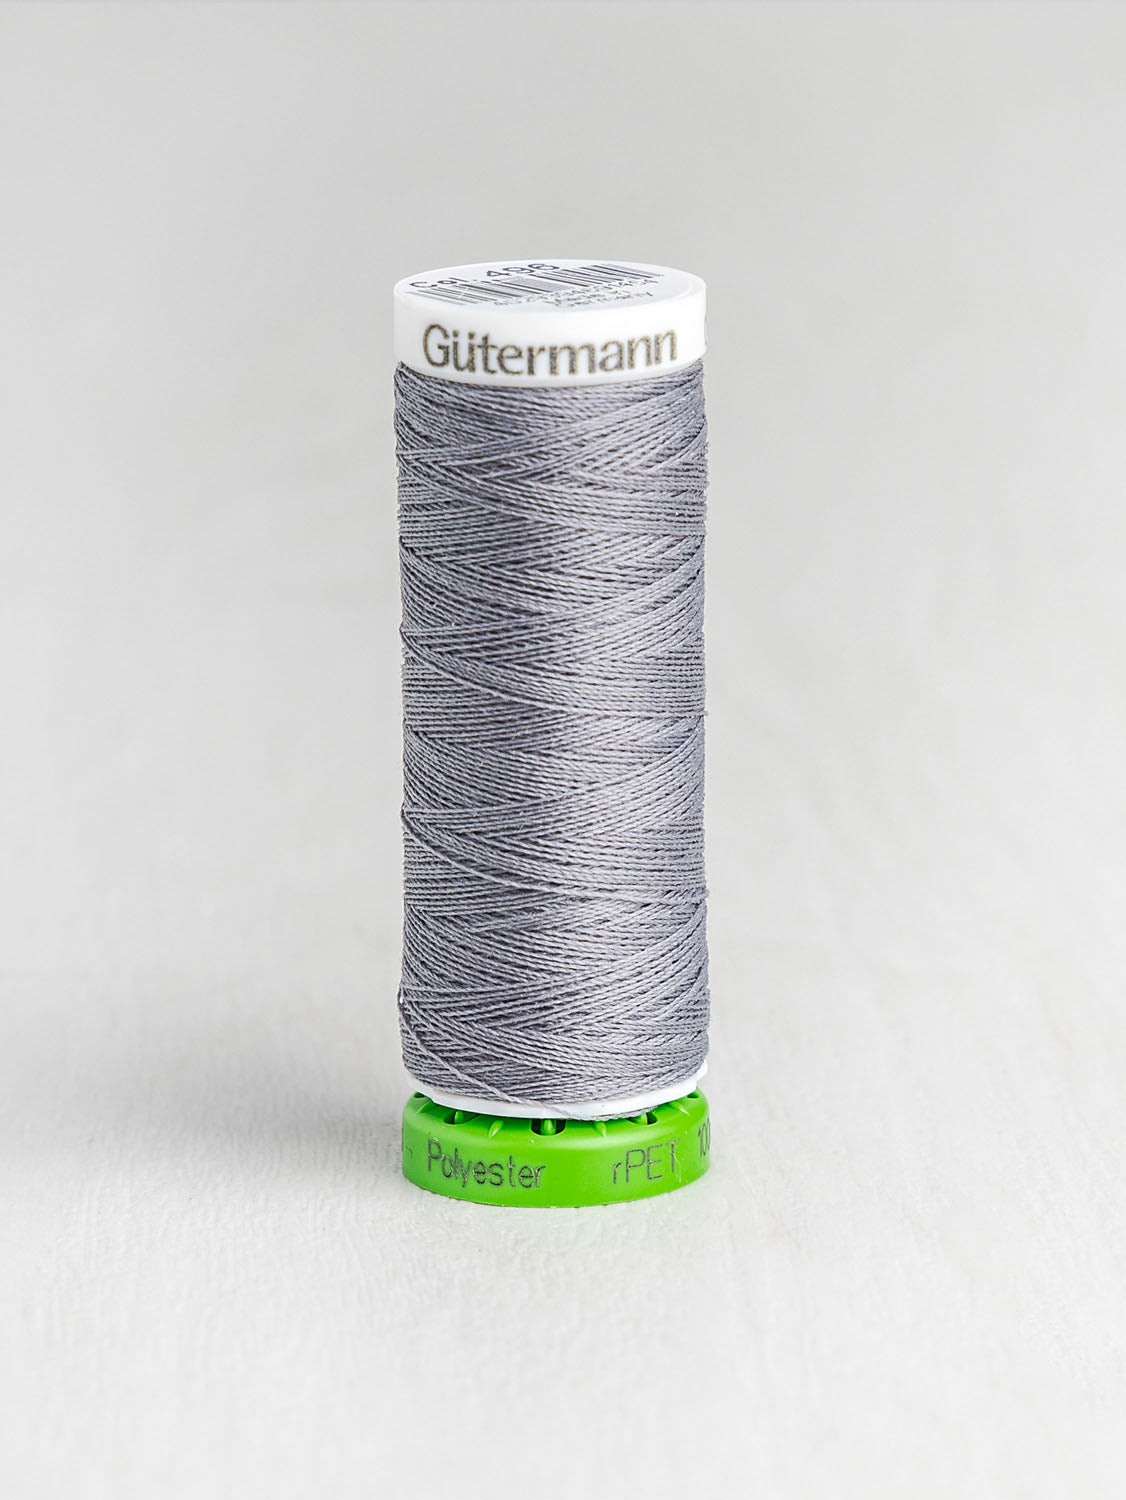 Gütermann All Purpose rPET Recycled Thread - Pewter 496 | Core Fabrics